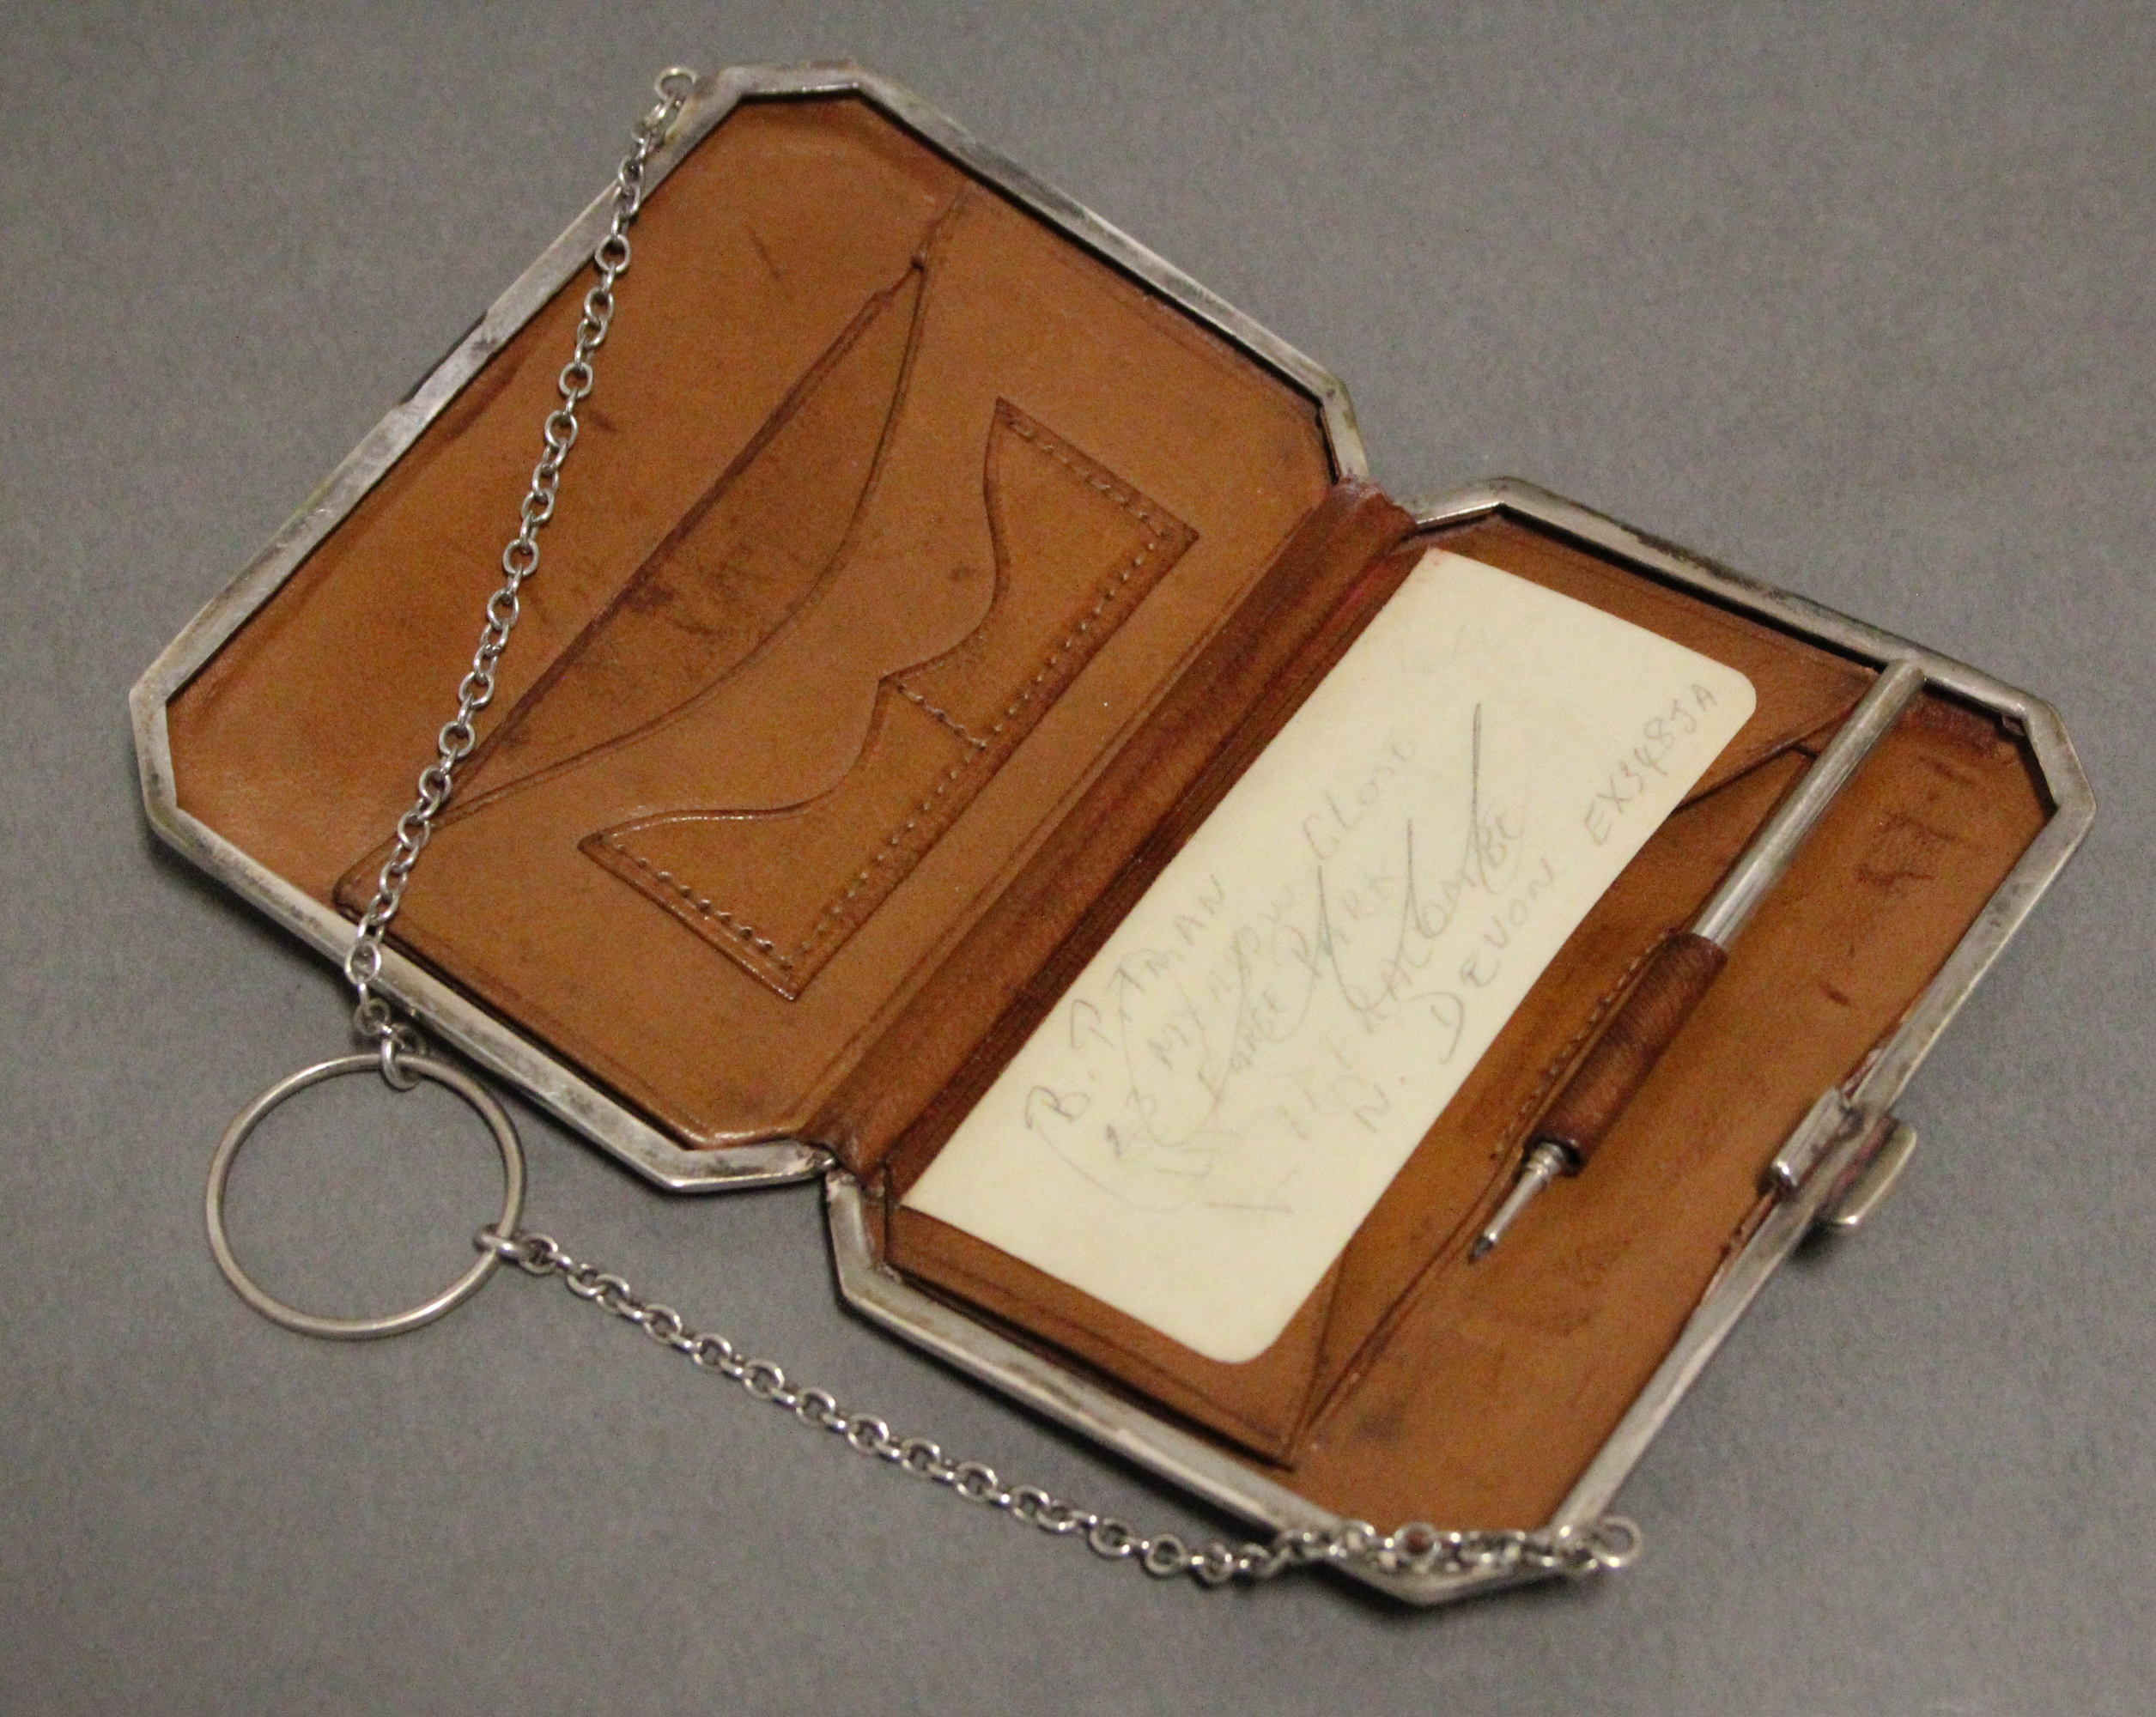 A George V engraved silver rectangular evening purse with canted corners, tan leather interior, & - Image 2 of 4